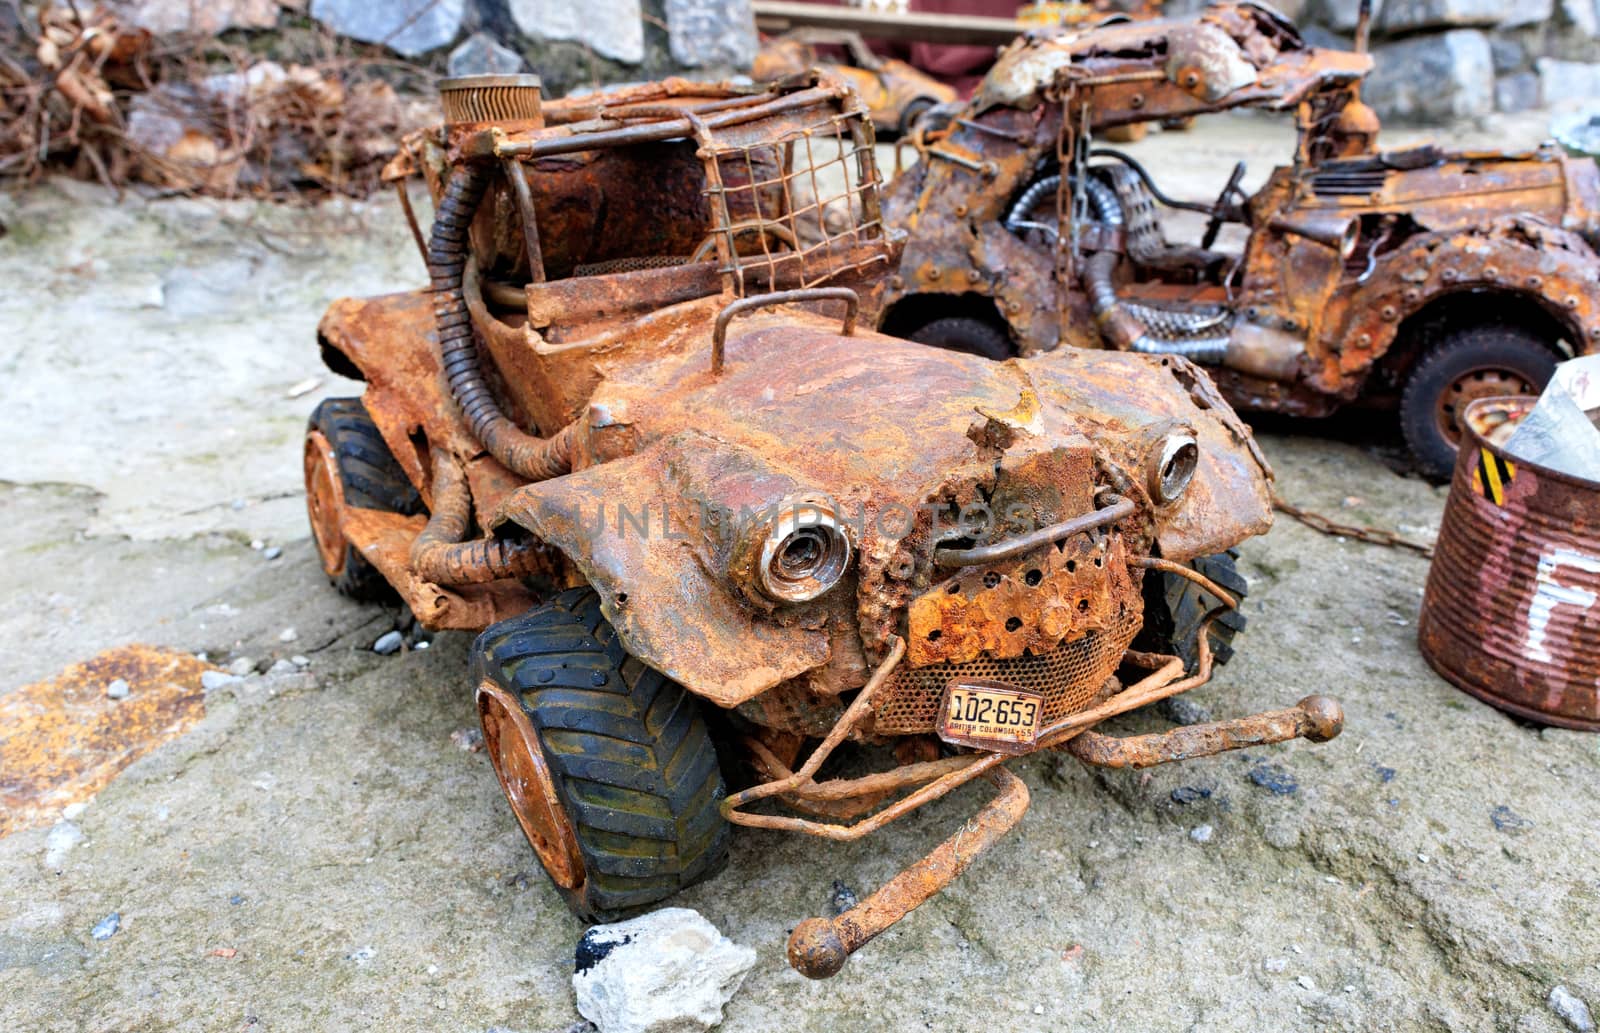 A rusty toy car invented made from household waste. by Sergii